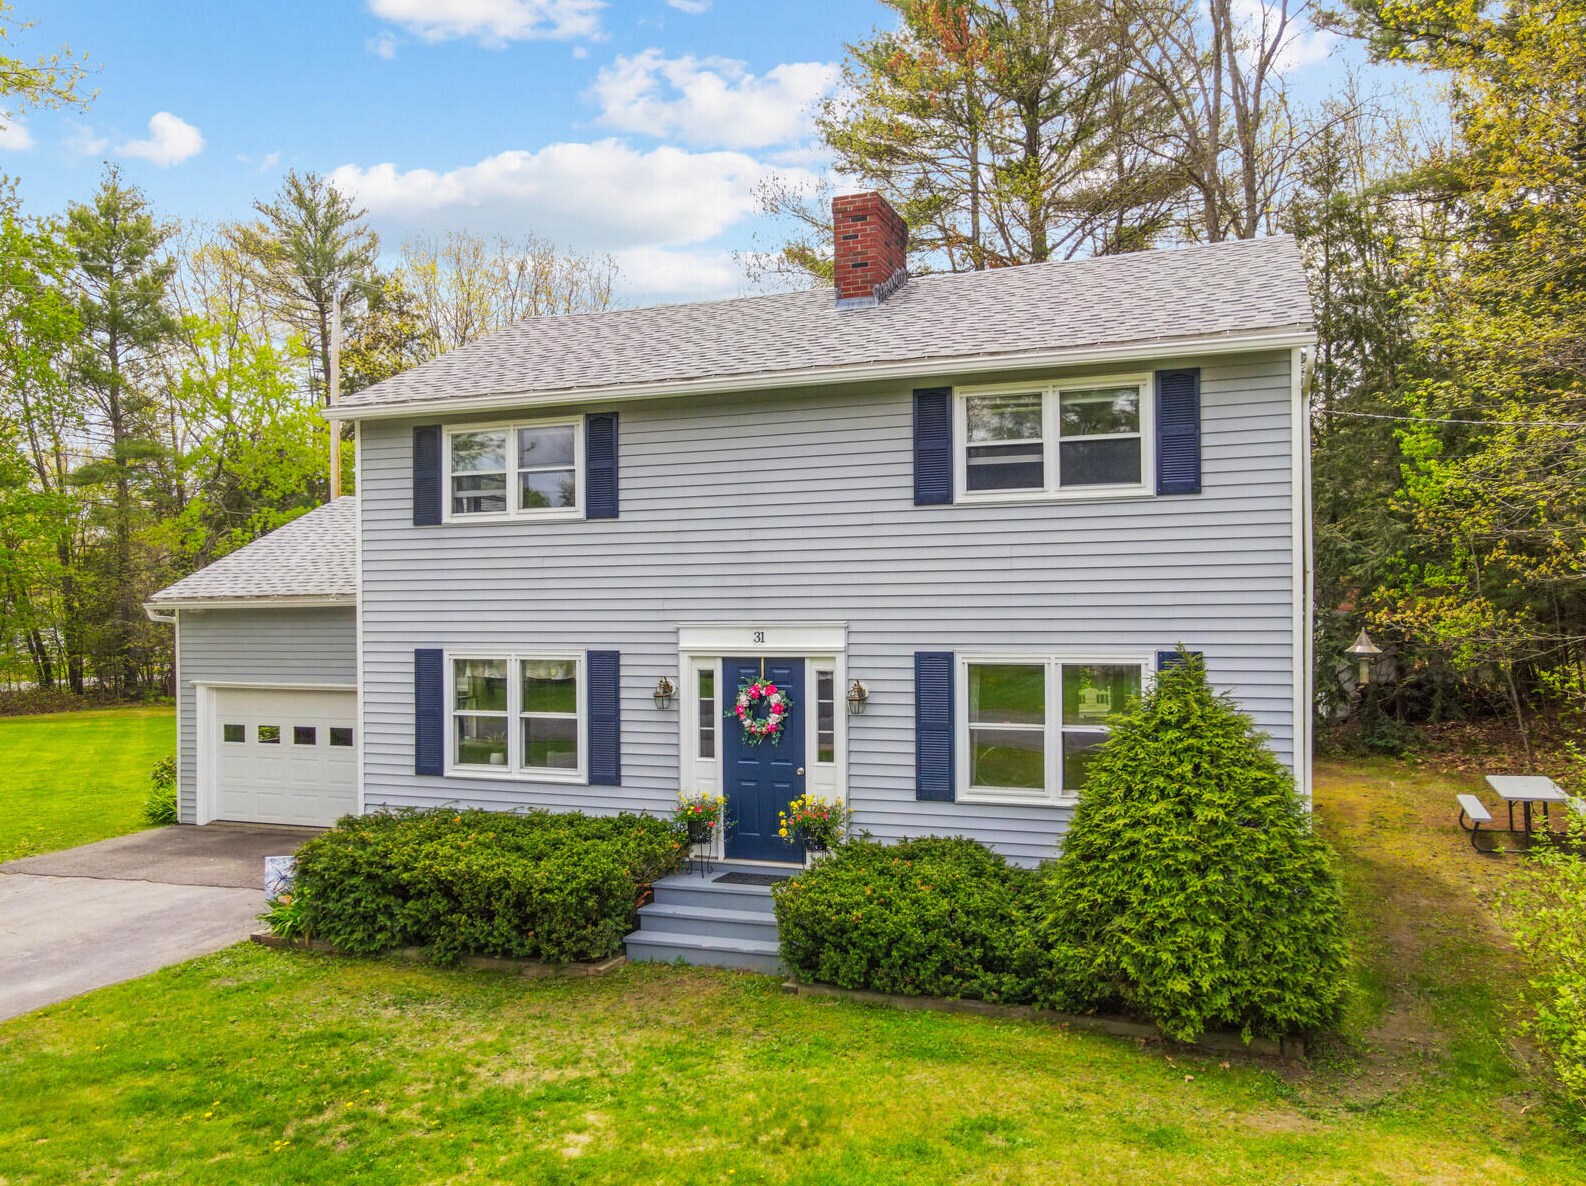 31 Smiley Ave, Waterville, ME 04901